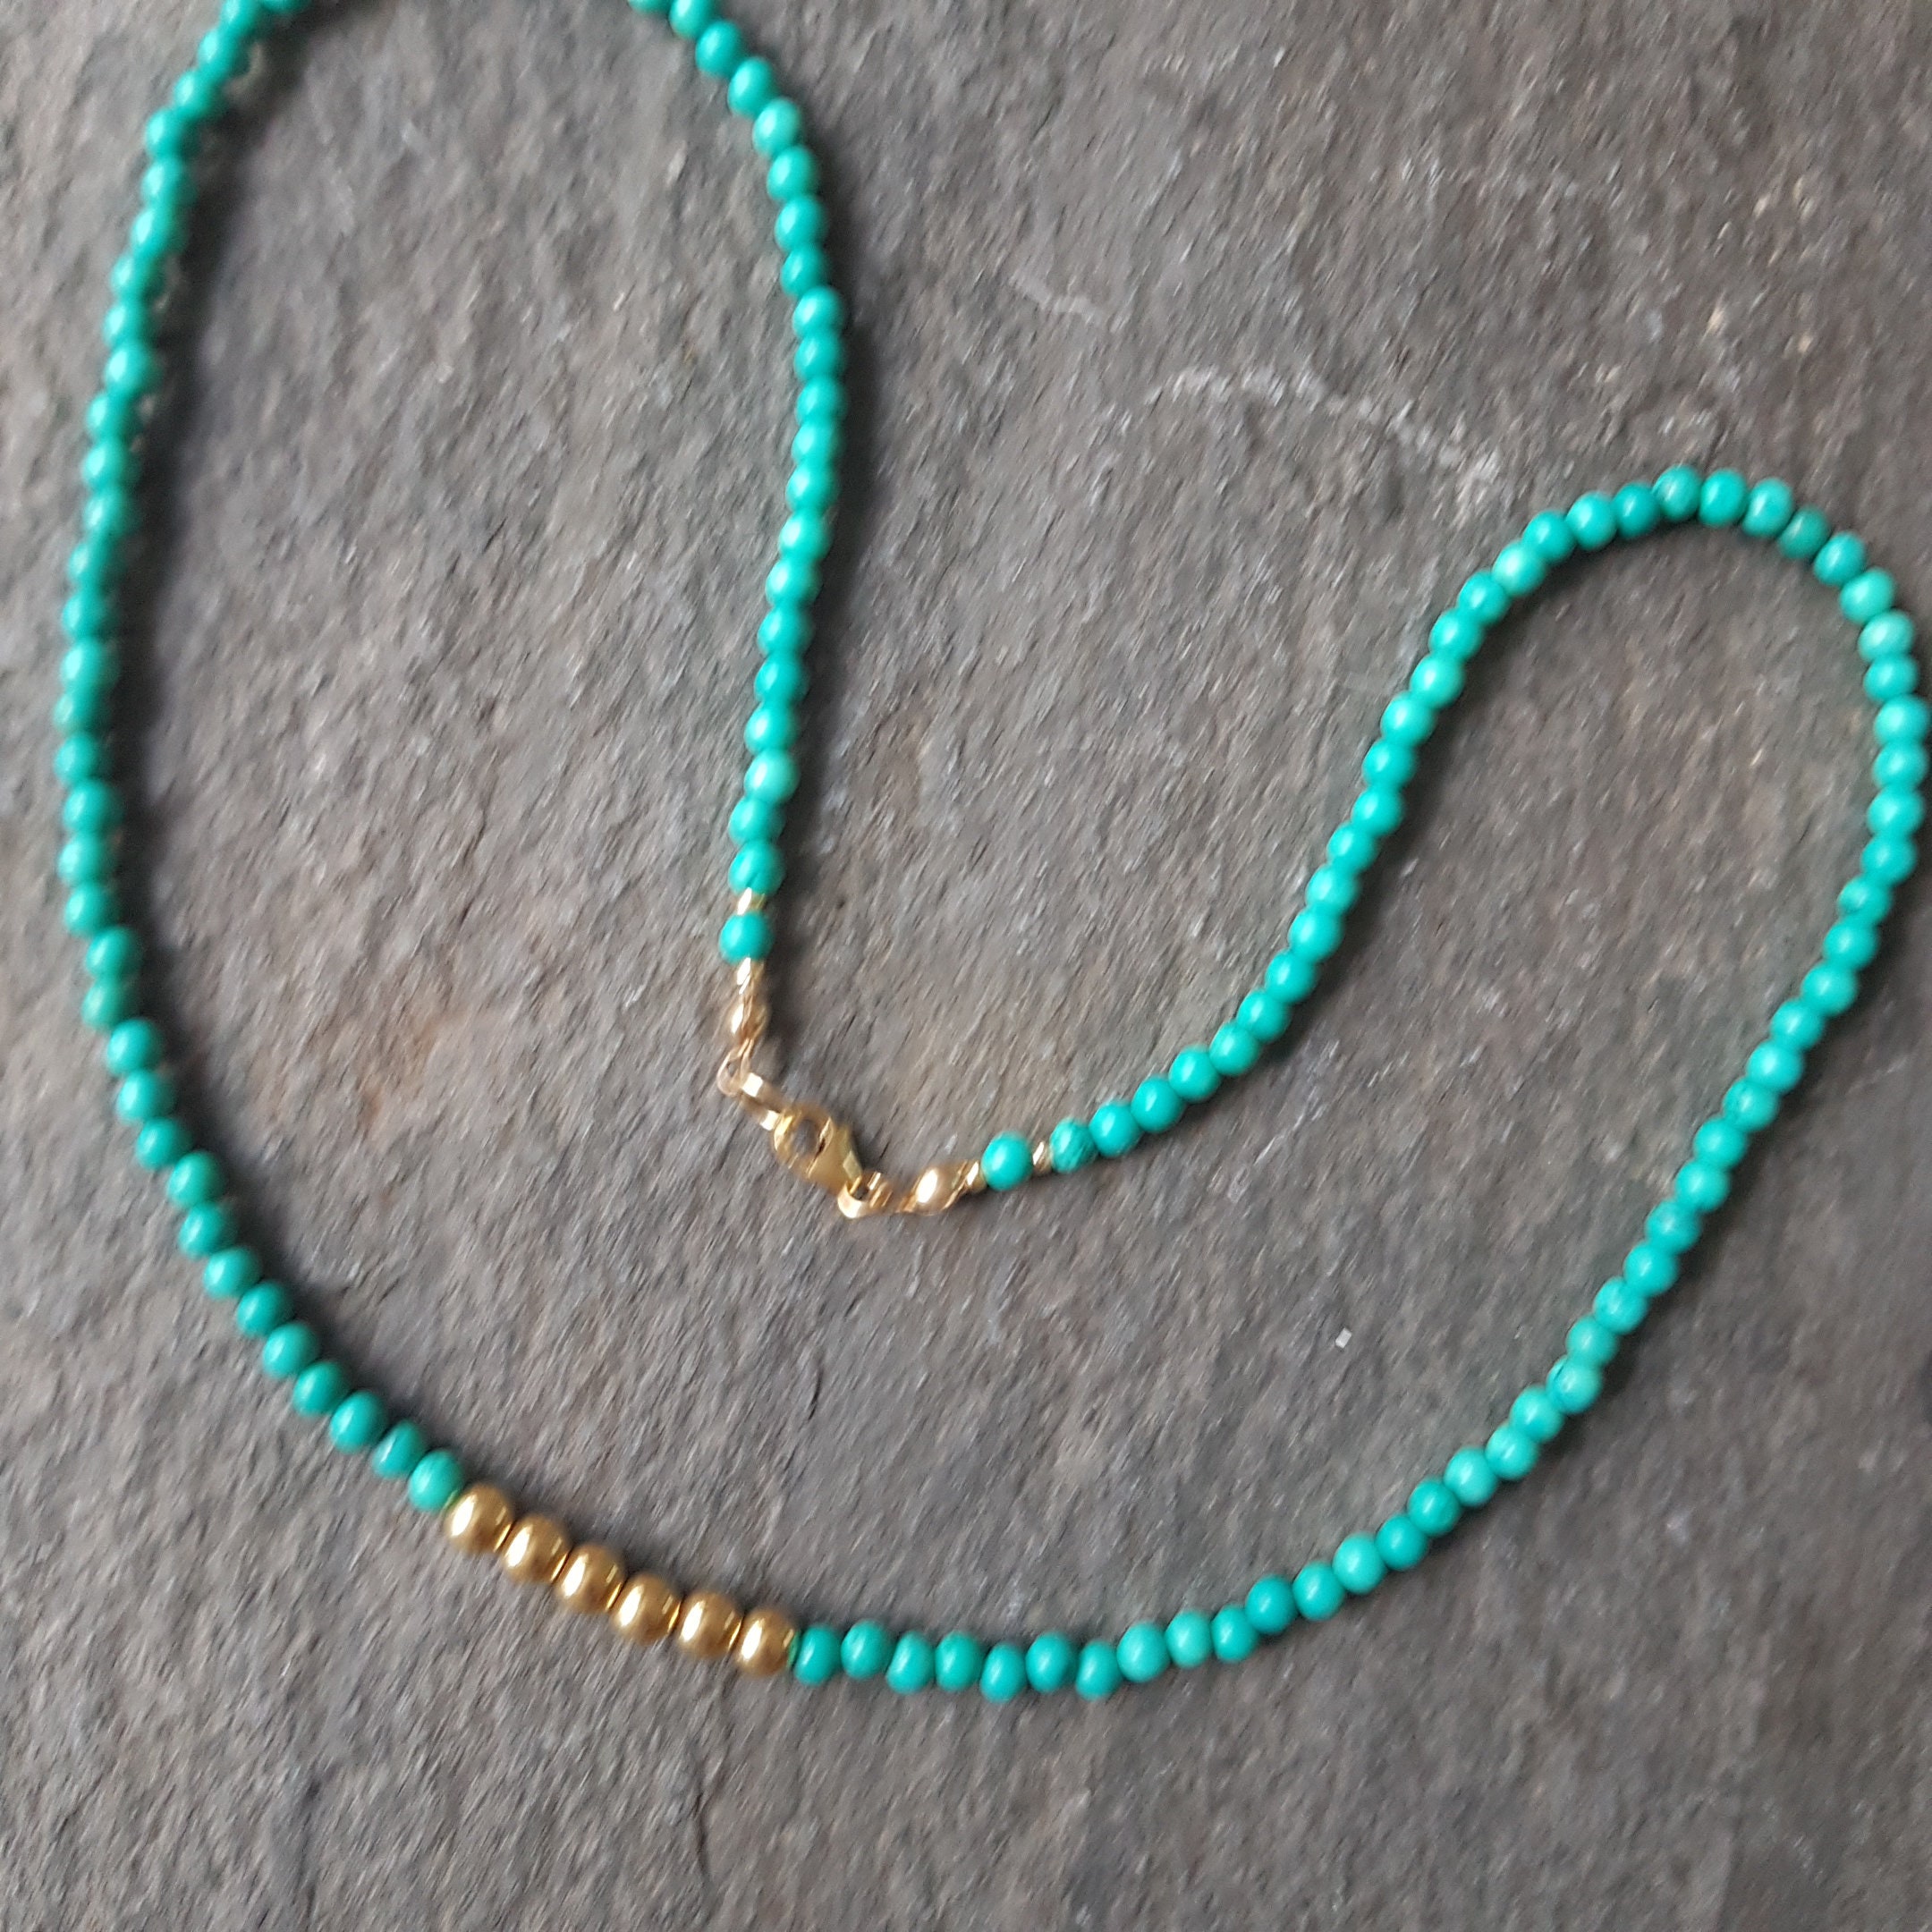 Turquoise necklace choker 18K Gold Fill or Sterling Silver real 4mm ...